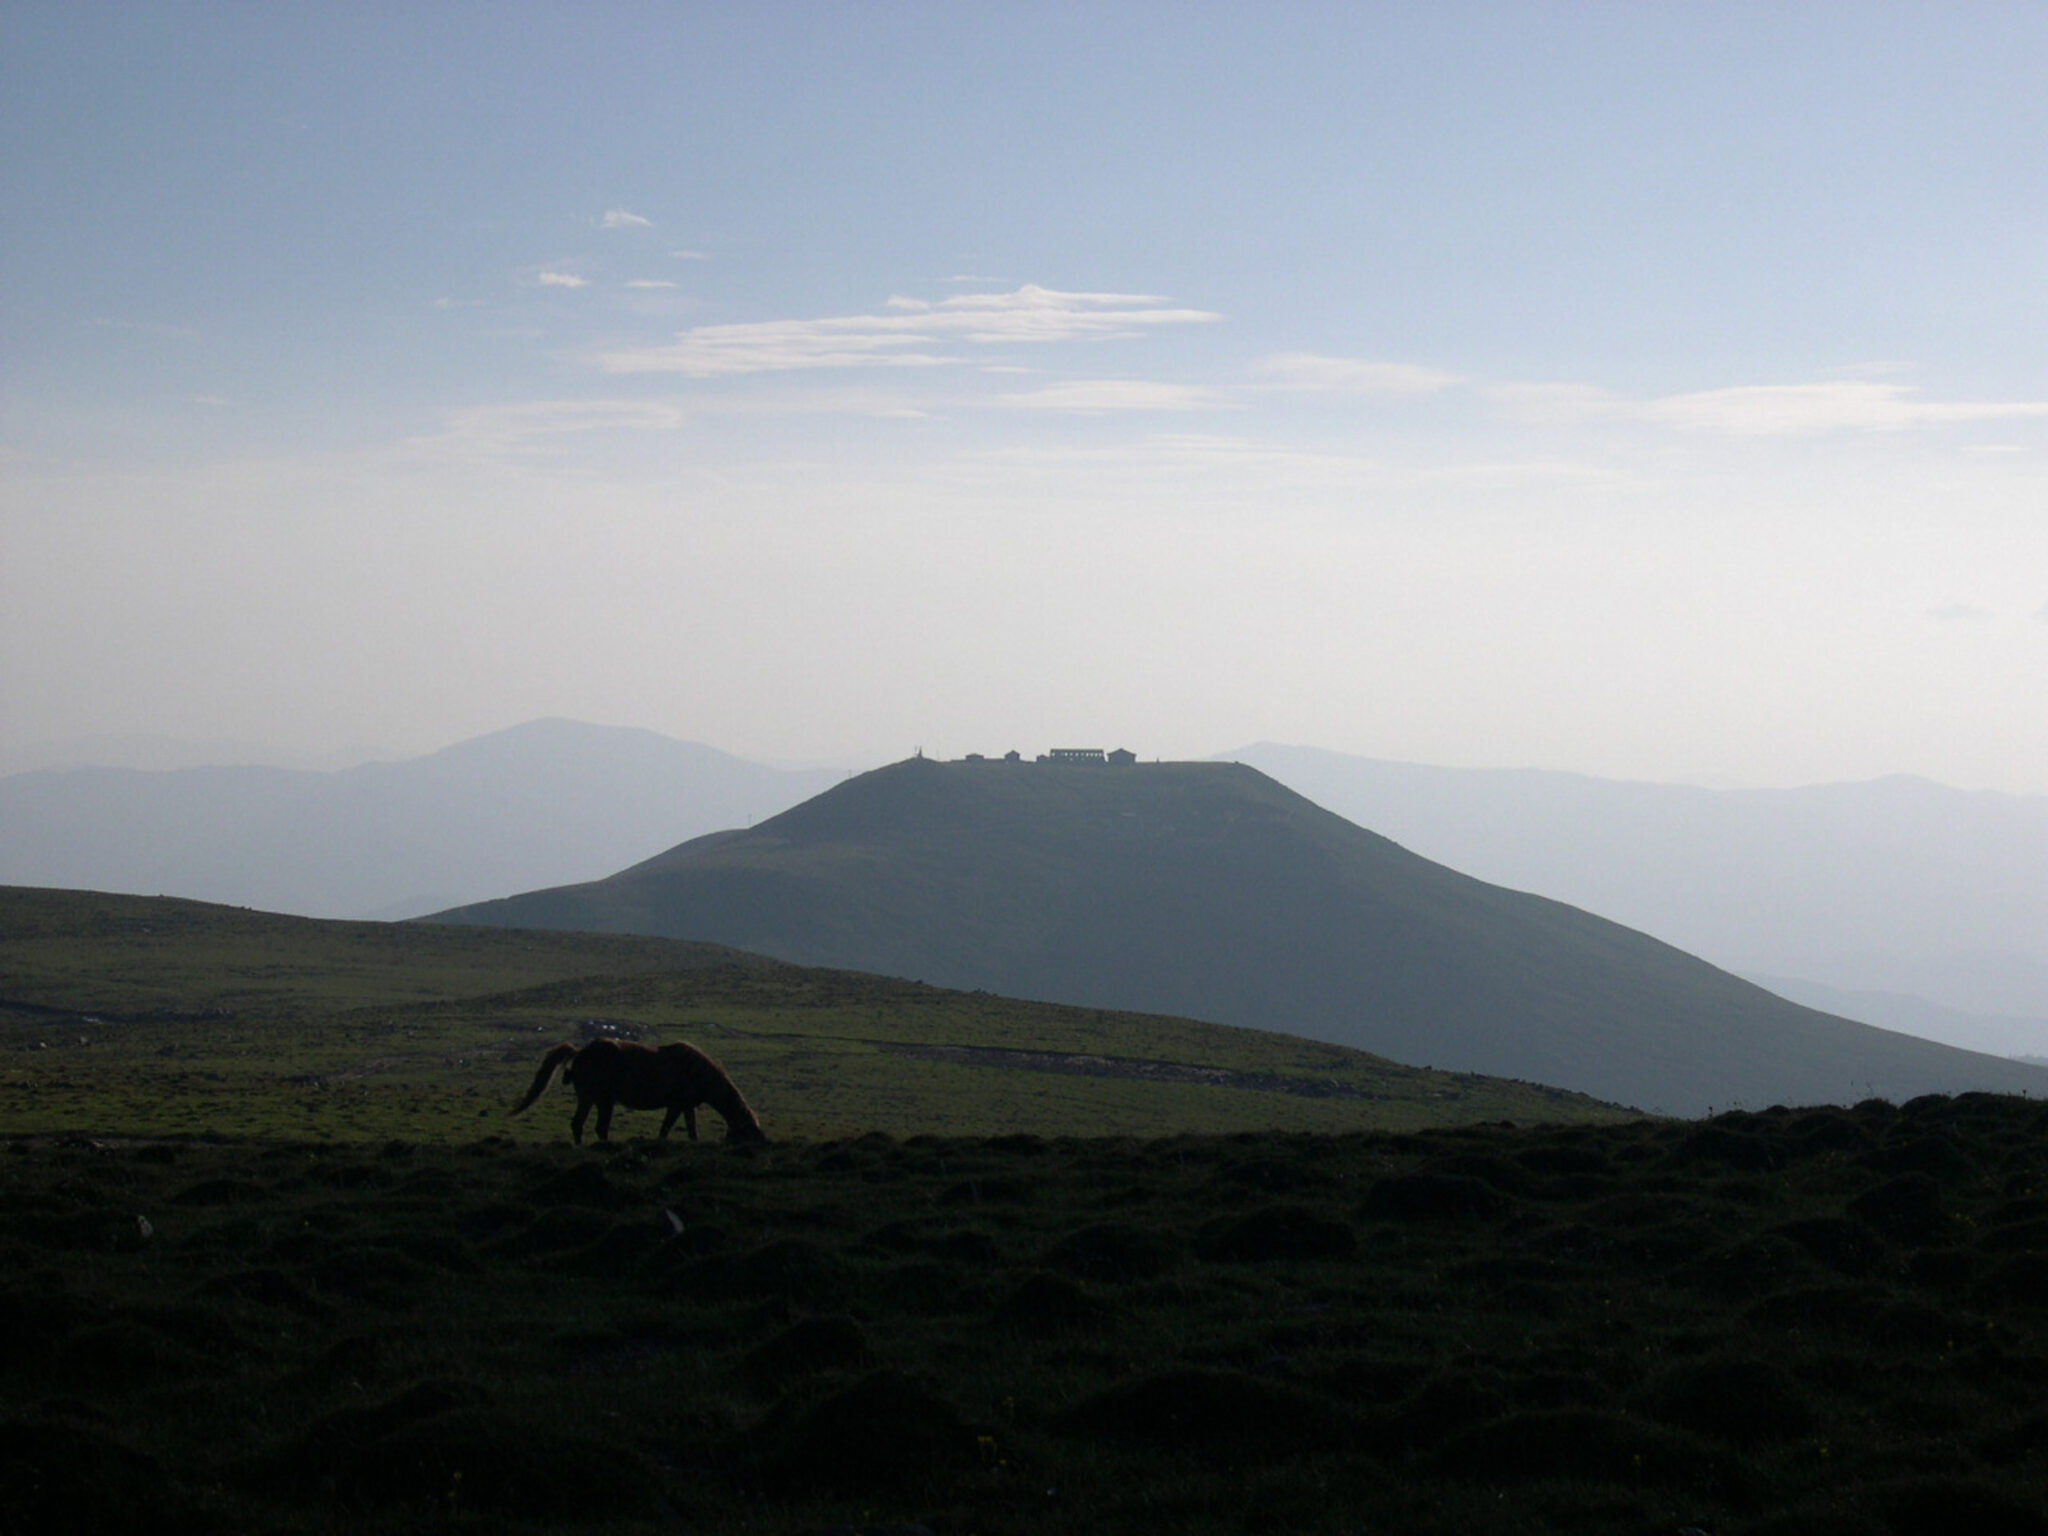 Wide view of mesa-topped mountain under hazy sky; lone horse grazes on green pasture in foreground